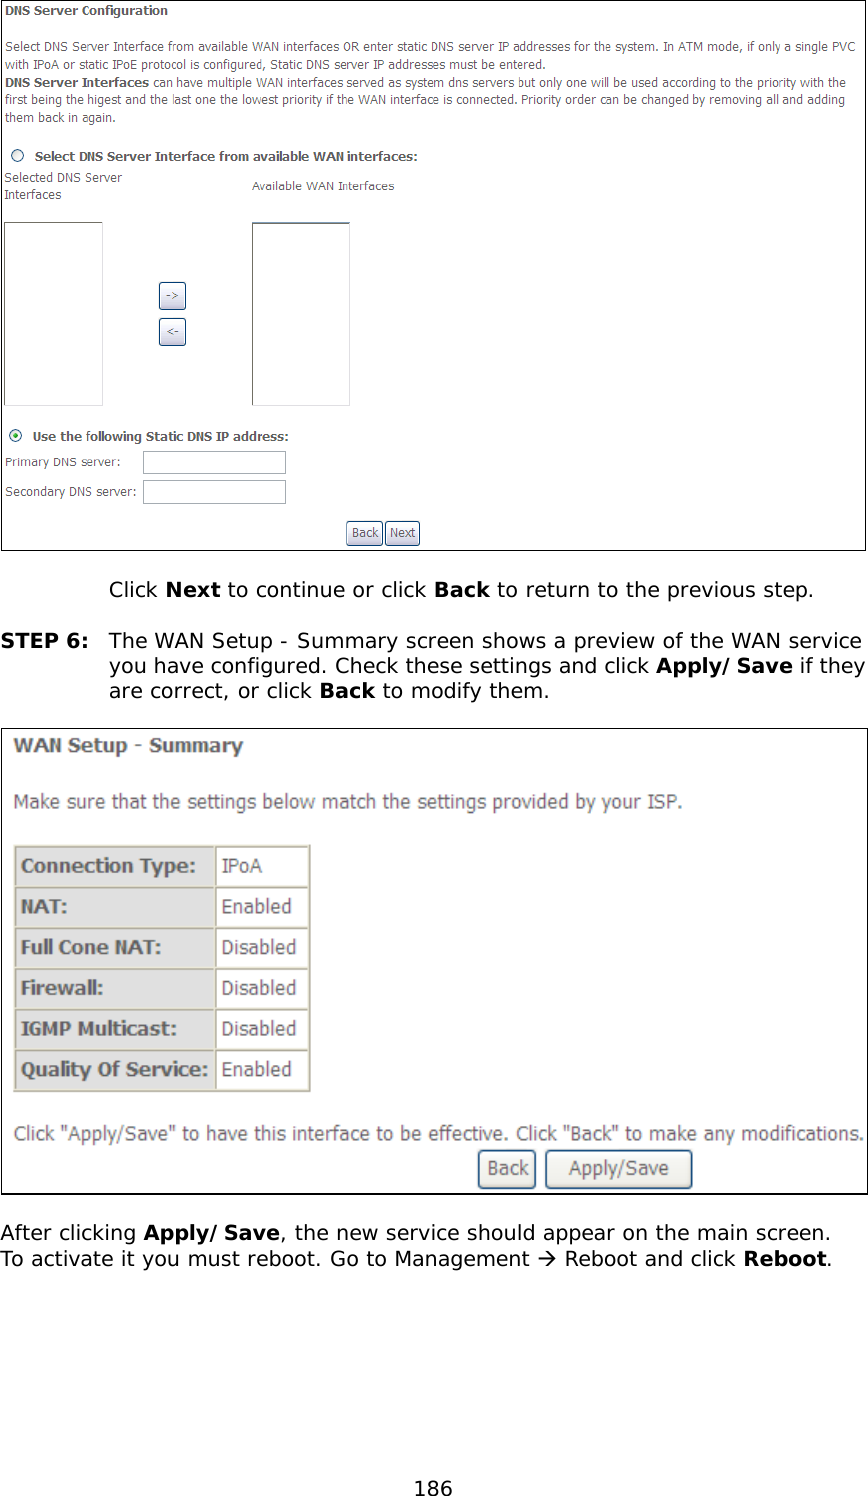  186    Click Next to continue or click Back to return to the previous step.  STEP 6:  The WAN Setup - Summary screen shows a preview of the WAN service you have configured. Check these settings and click Apply/Save if they are correct, or click Back to modify them.    After clicking Apply/Save, the new service should appear on the main screen.  To activate it you must reboot. Go to Management  Reboot and click Reboot.        